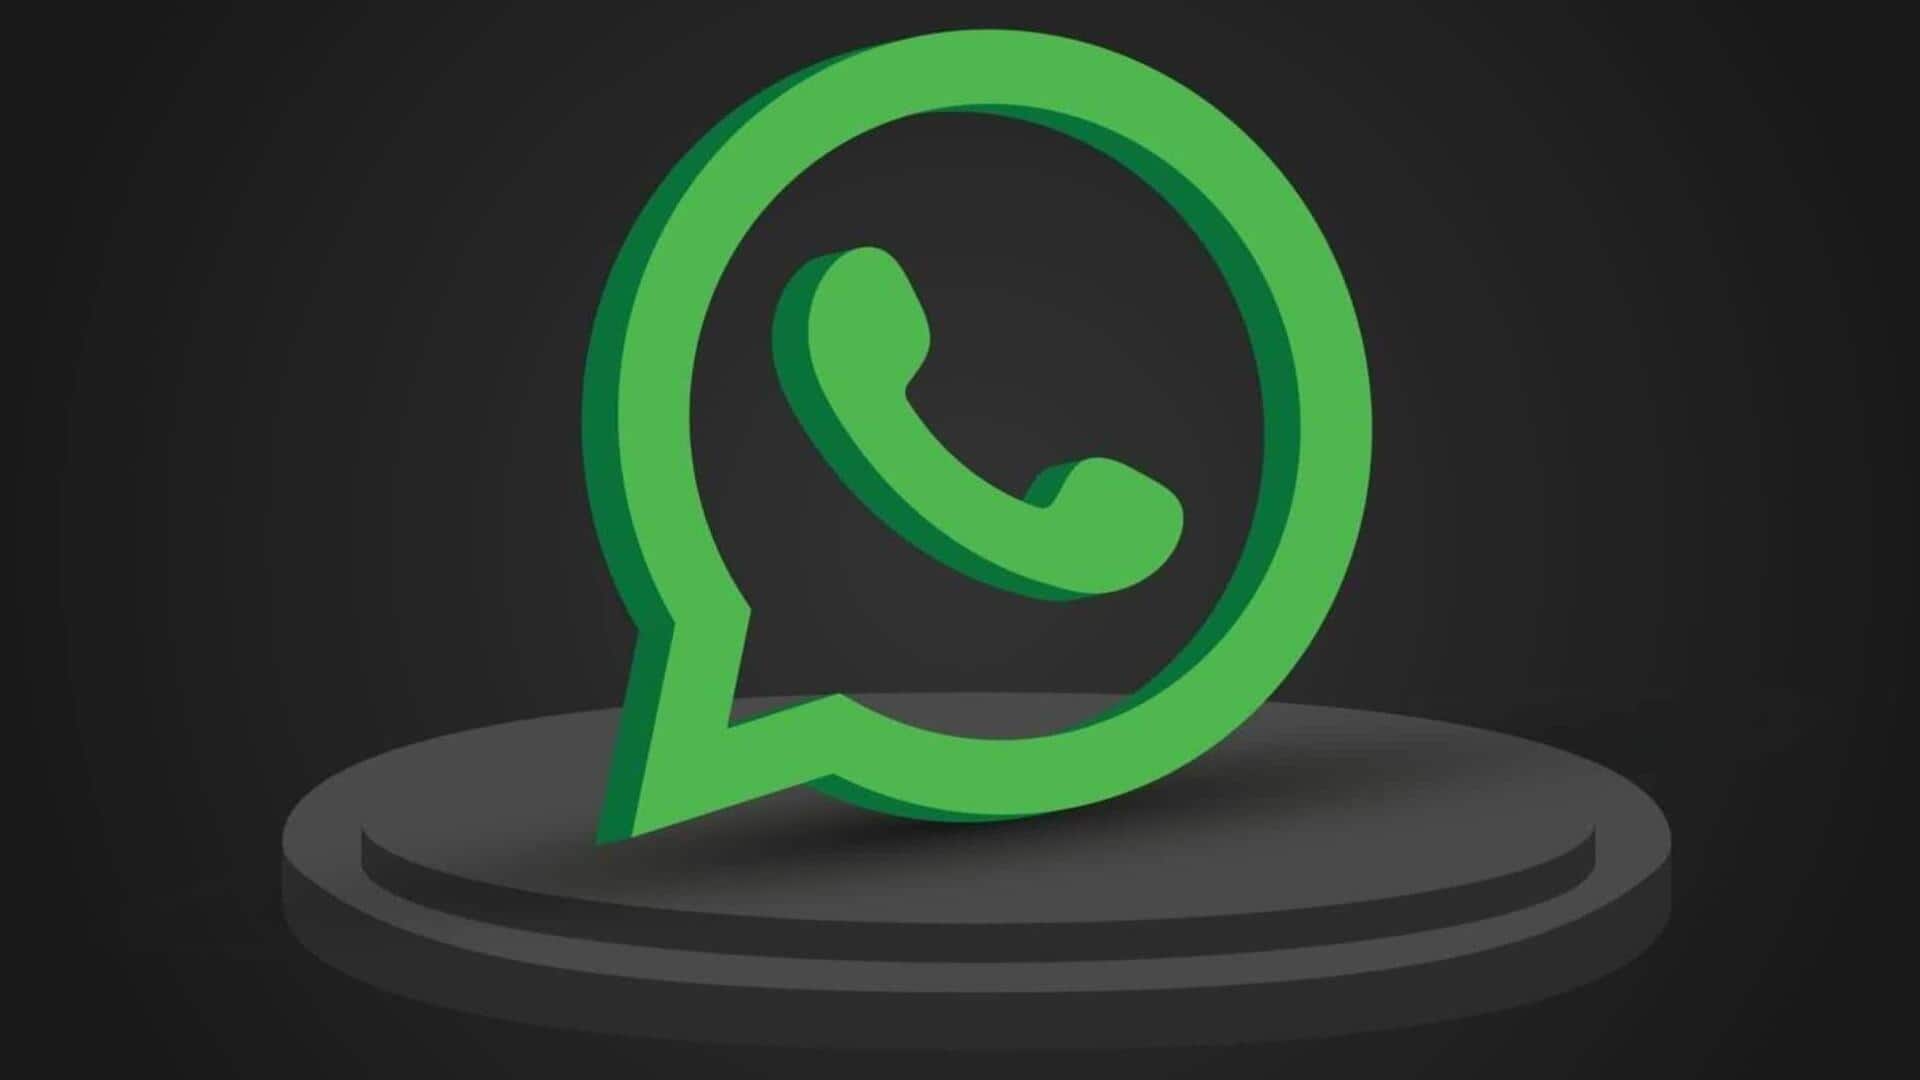 WhatsApp Web introduces filters for personal and group chats